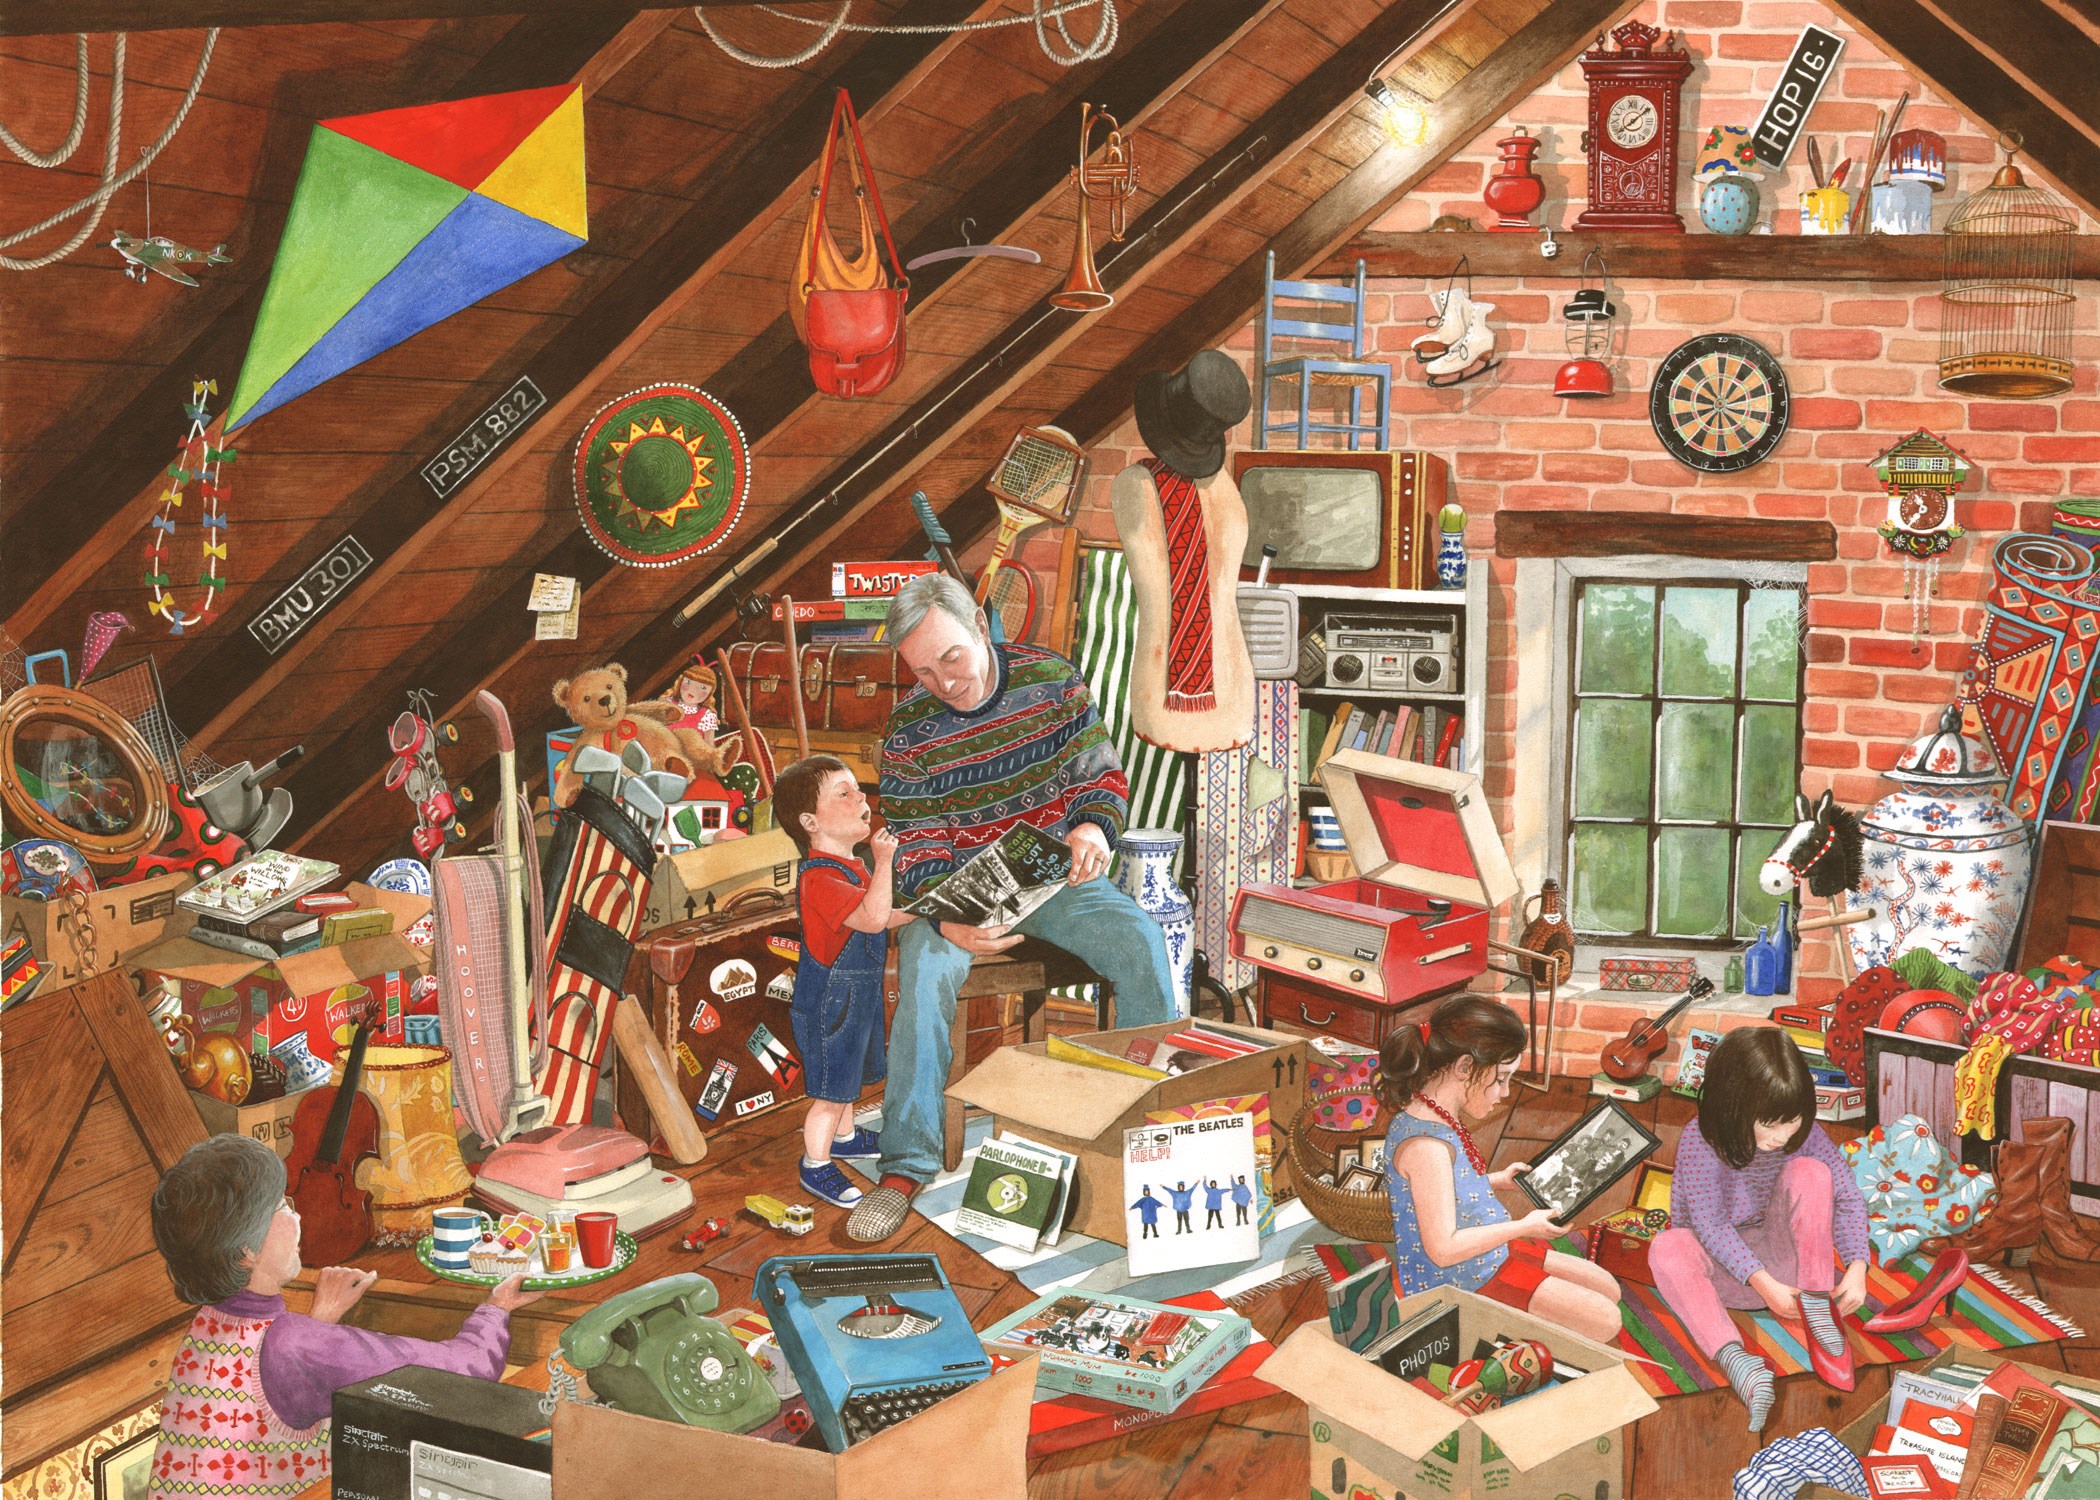 Castorland CastB-53407 The Cluttered Attic Puzzle 500